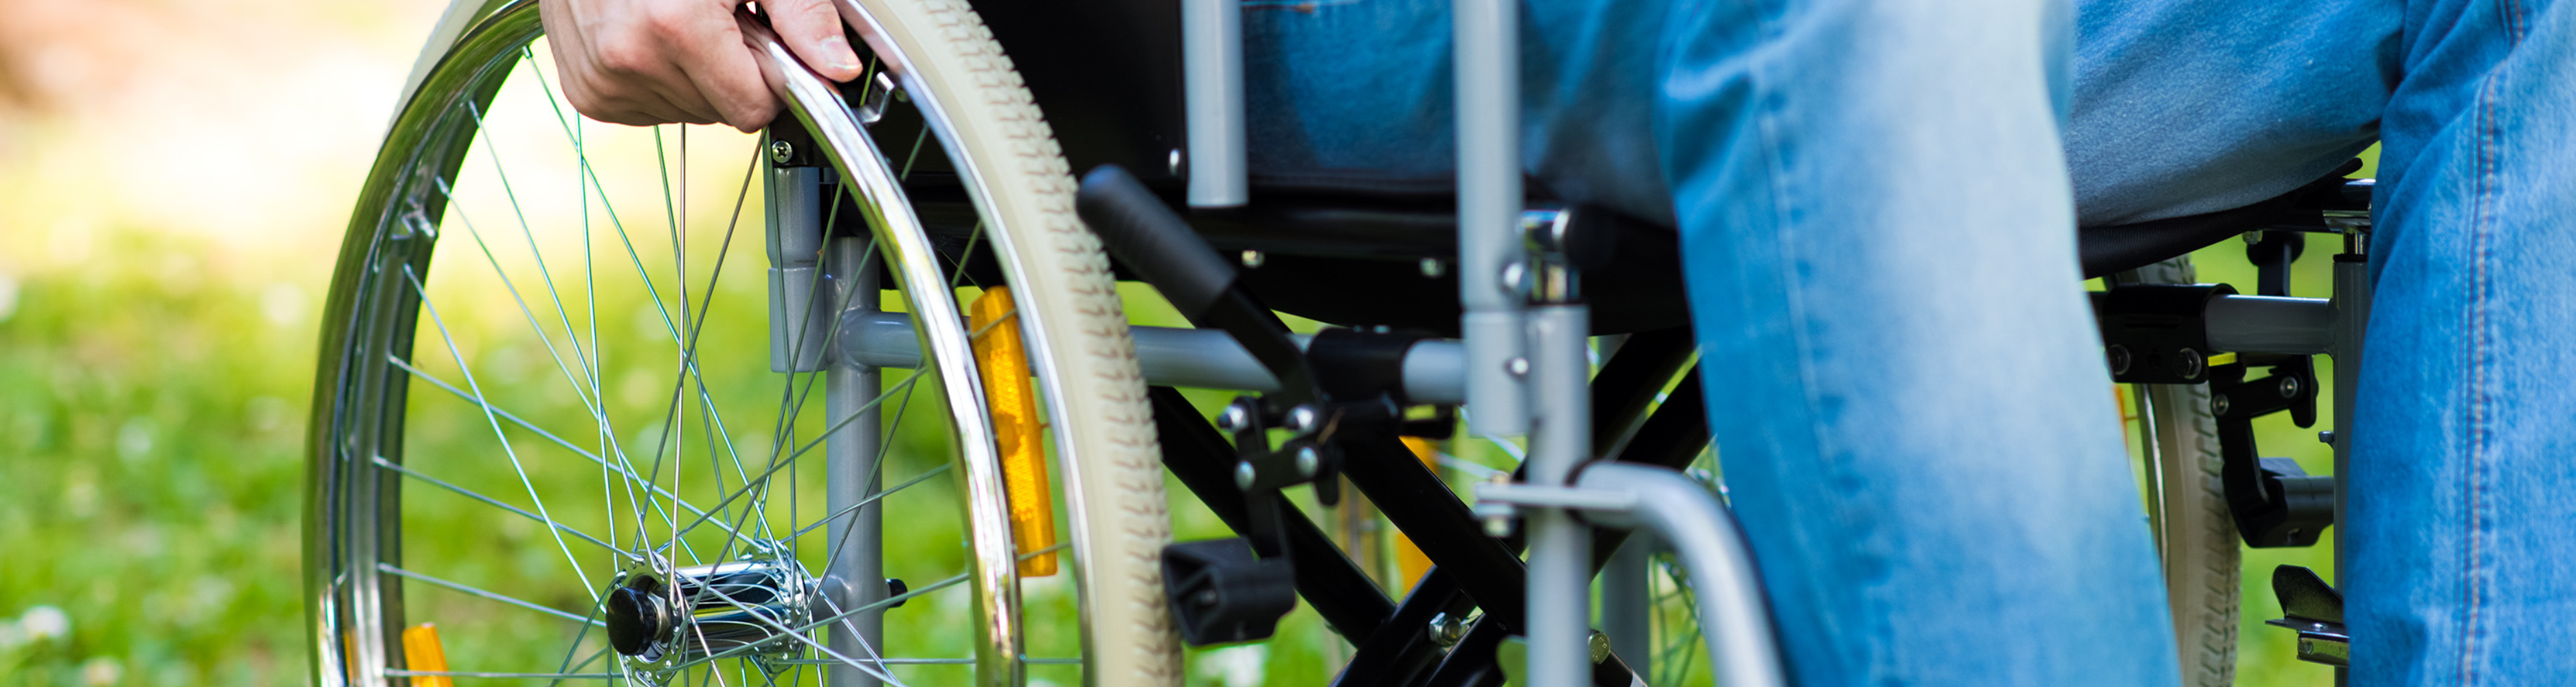 Up-close view of a wheelchair